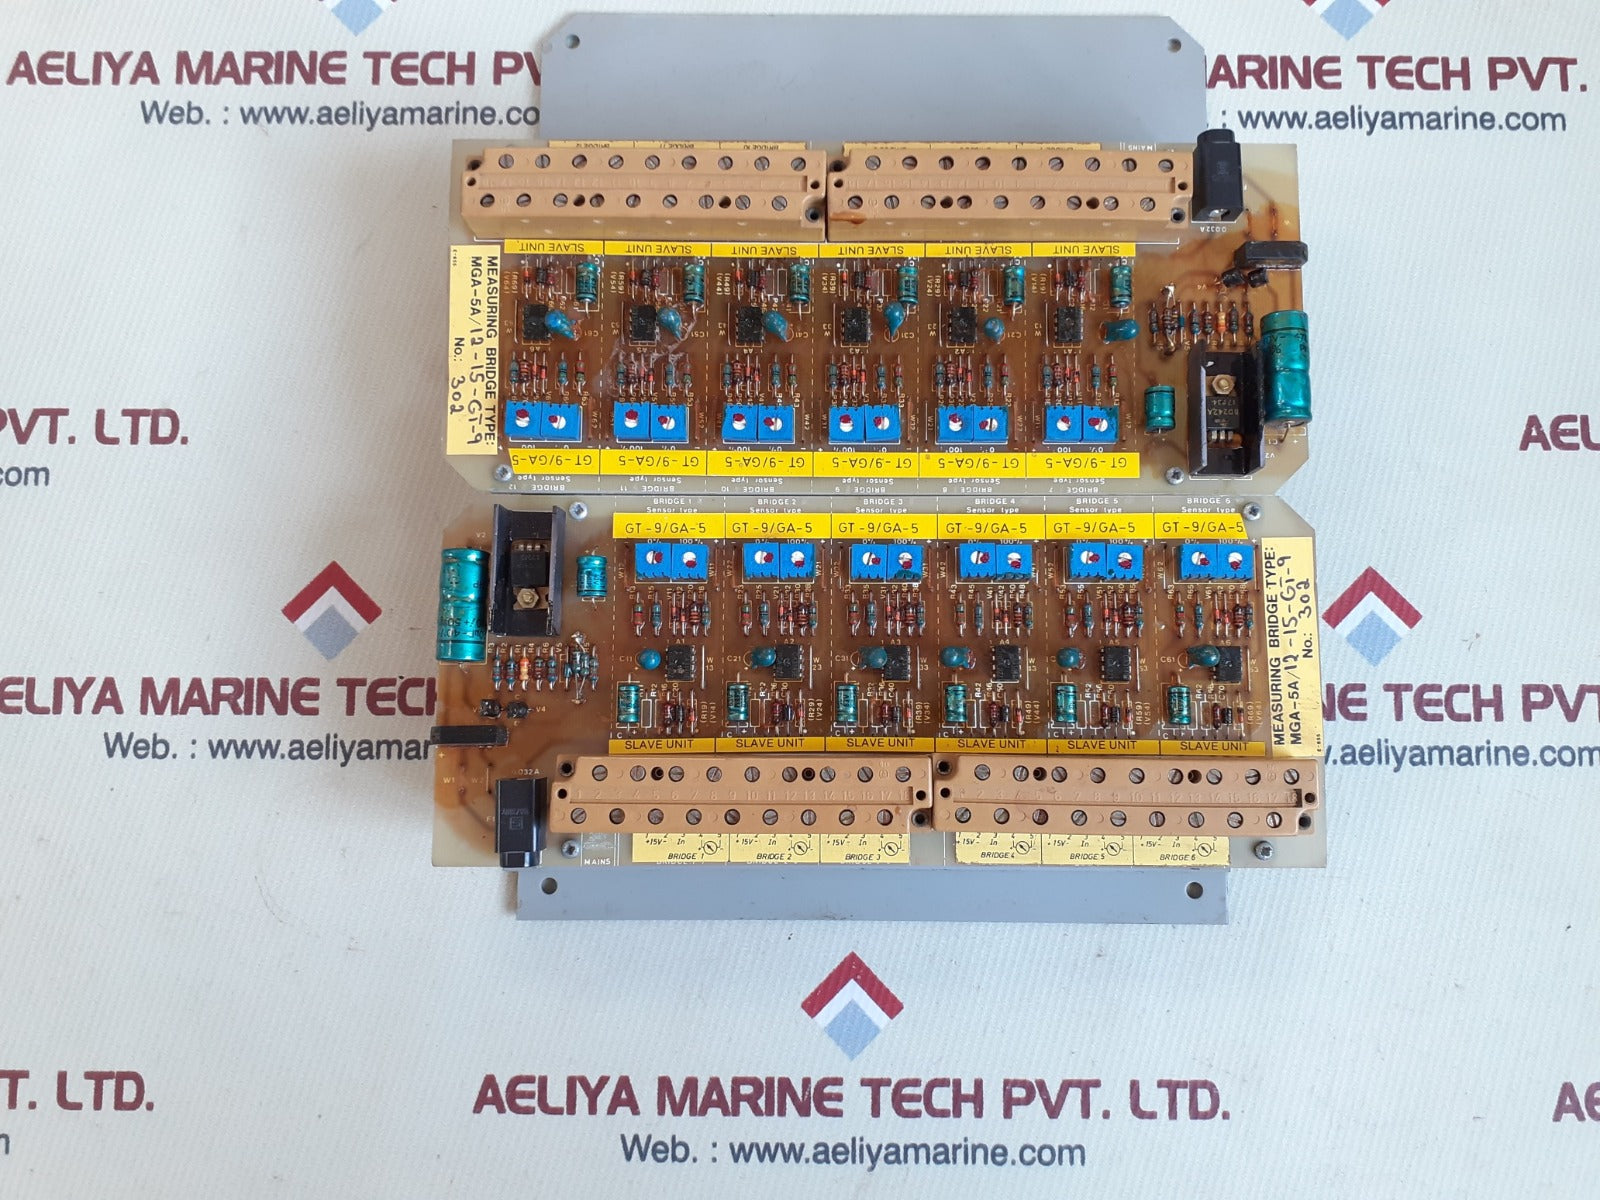 Autronica mga-5a/12-15-gt-9 pcb card 